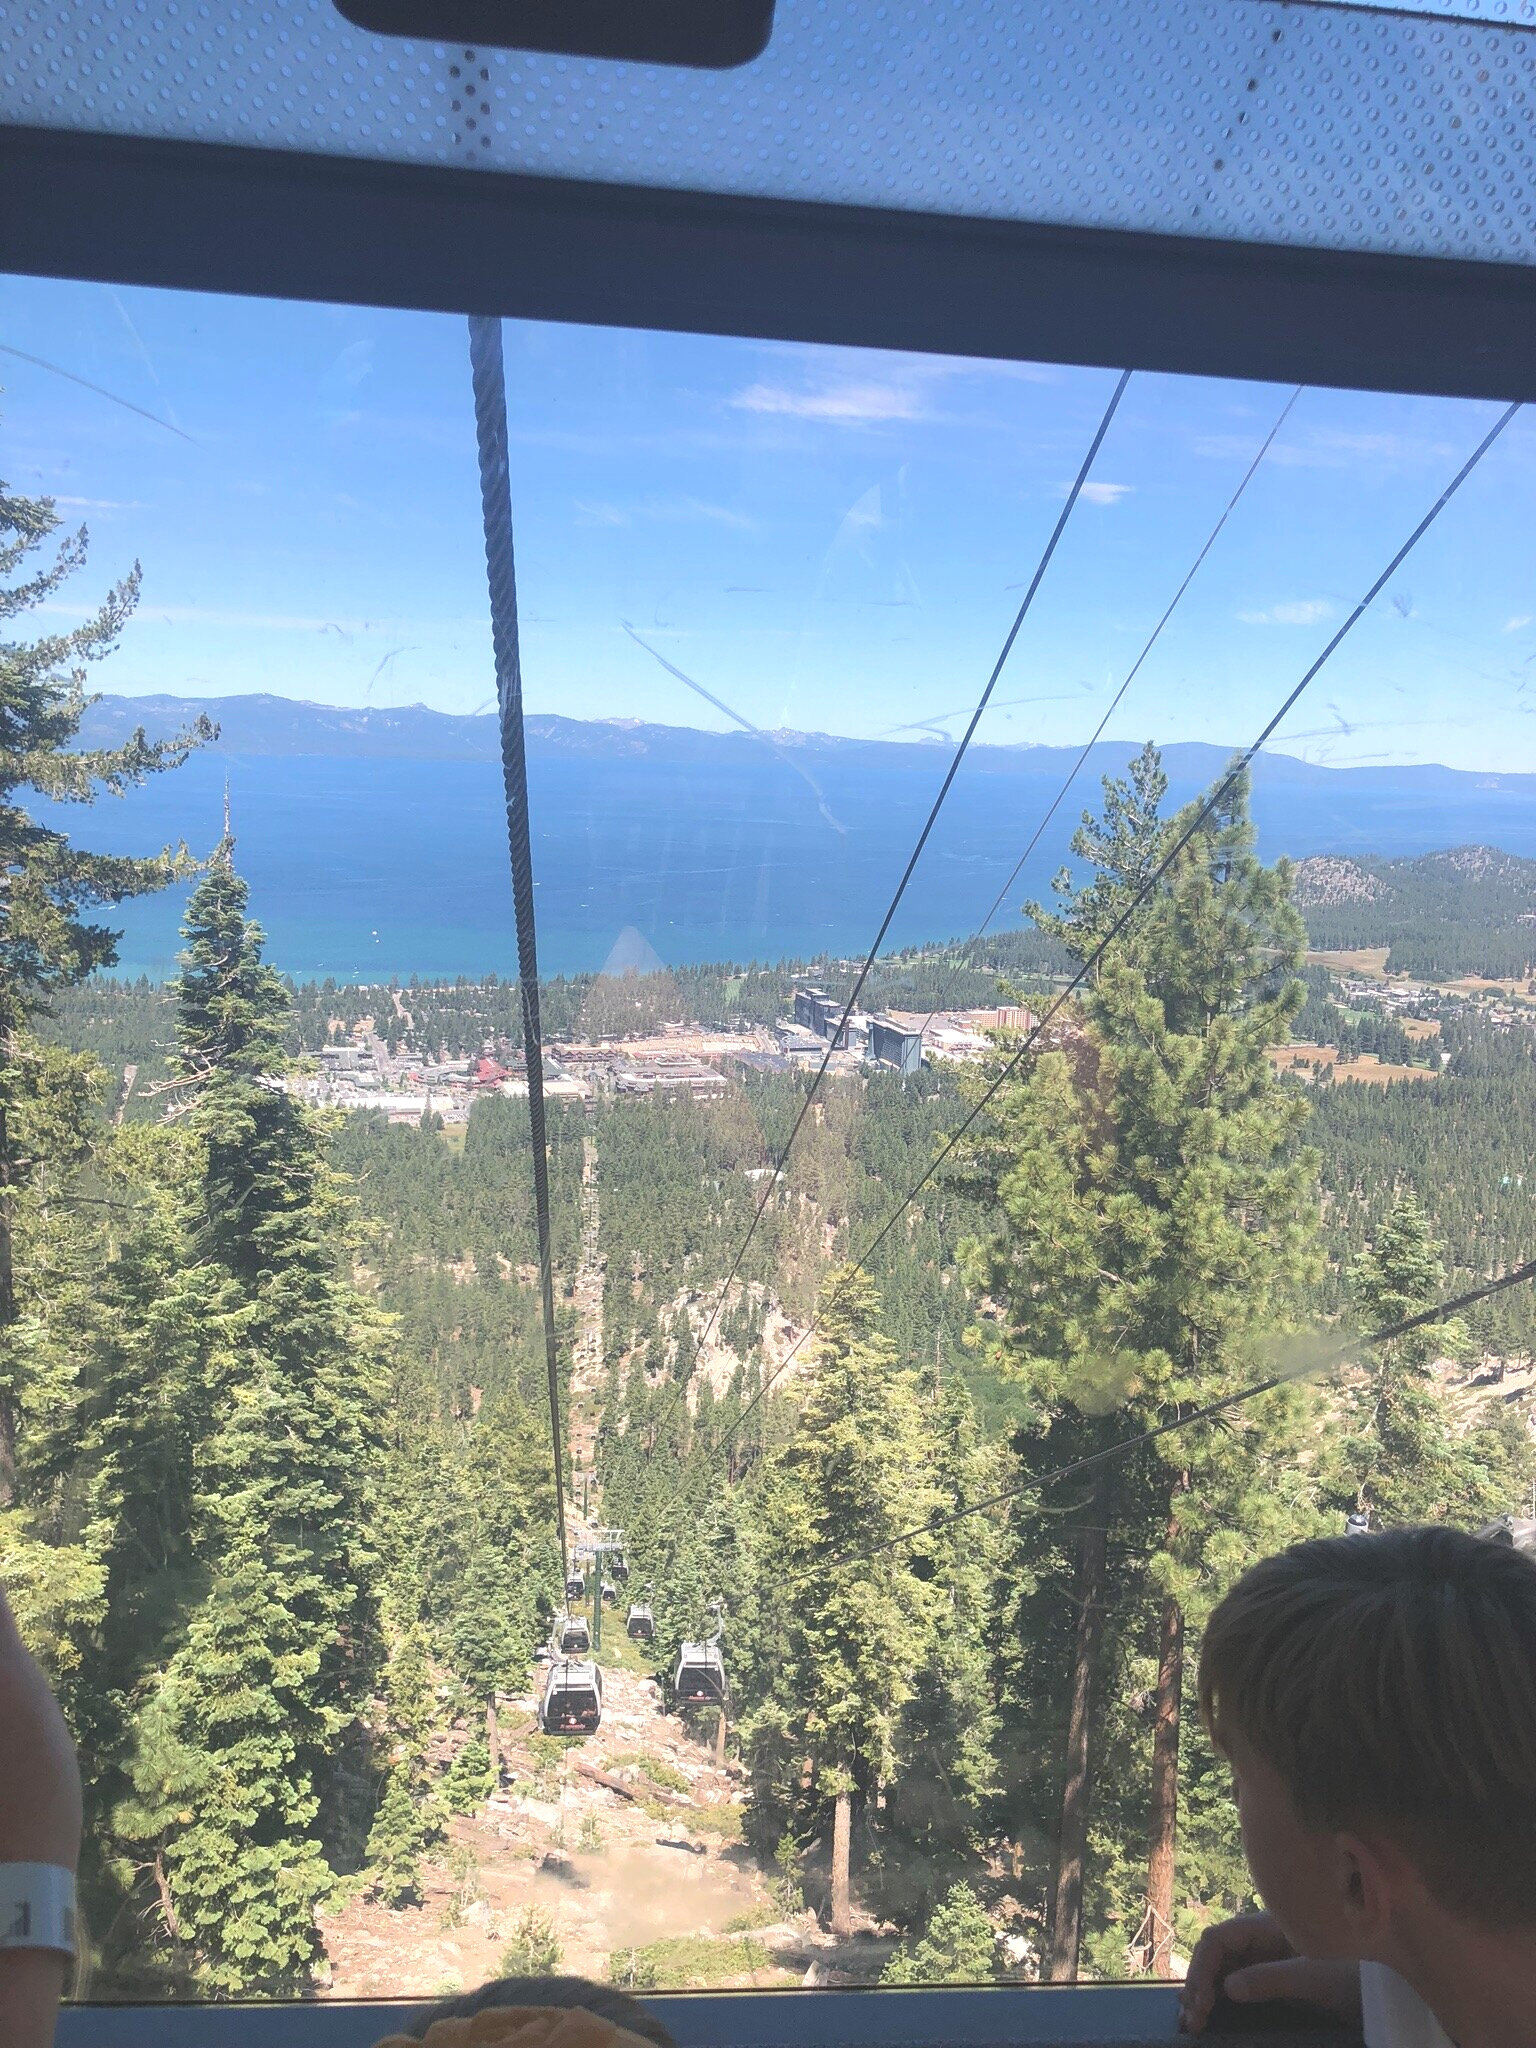 Cable cars up to Heavenly Village, Lake Tahoe